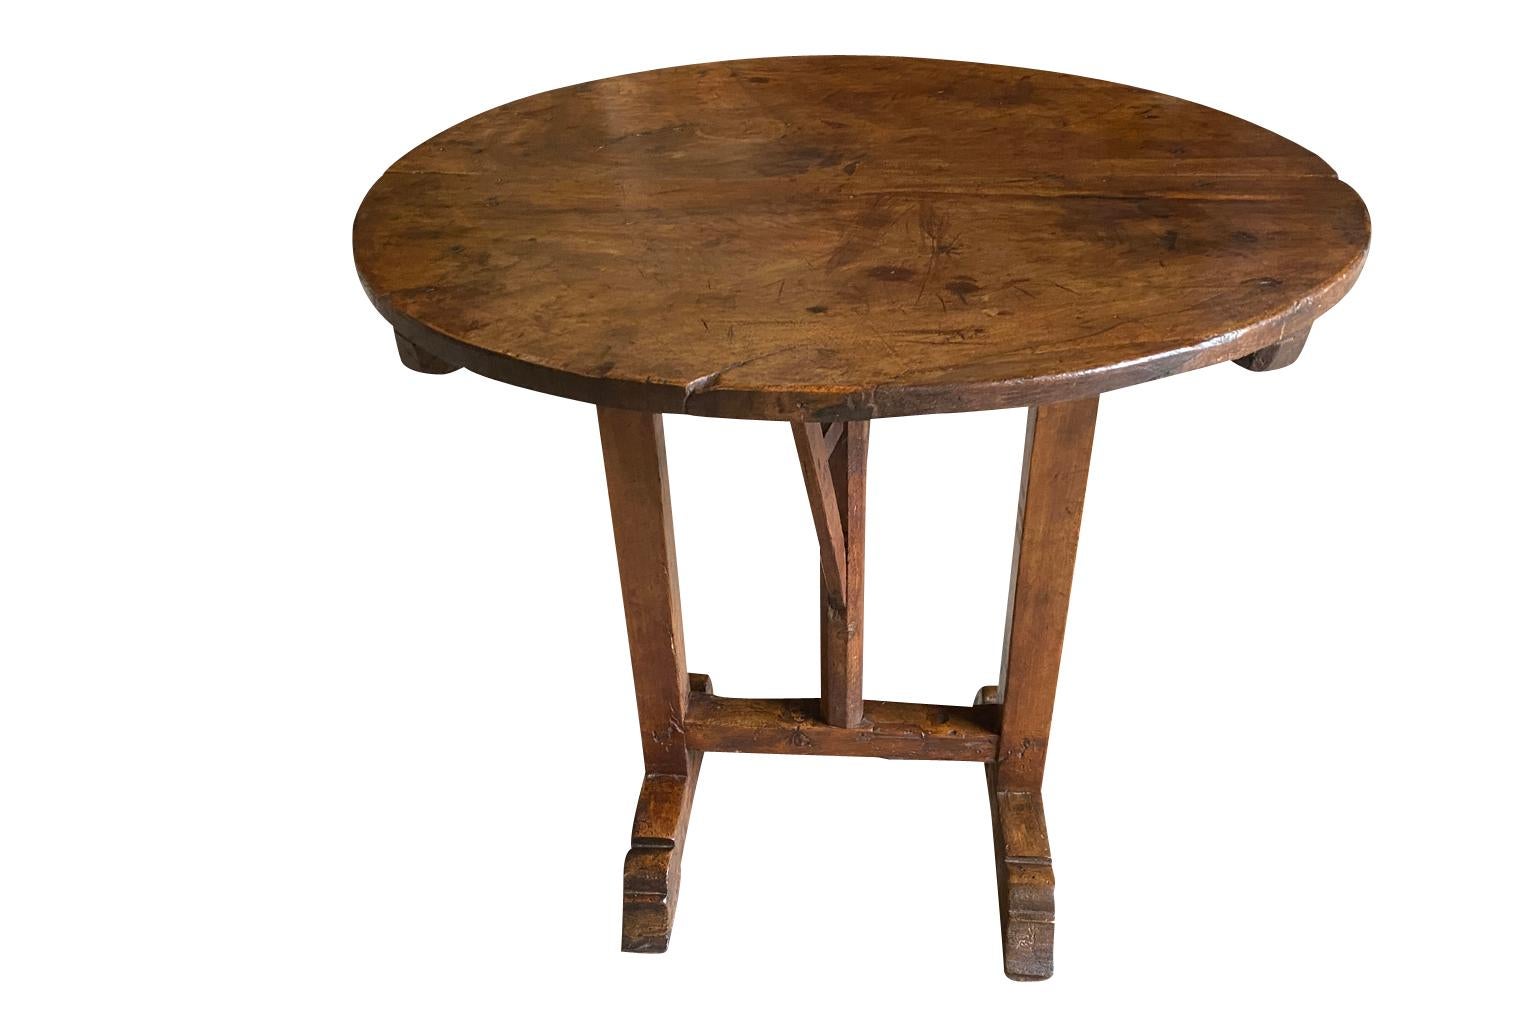 A very charming 19th century Wine Tasting Table from the Tuscan region of Italy.  Beautifully constructed from handsome walnut with a tilting top.  Wonderful patina.